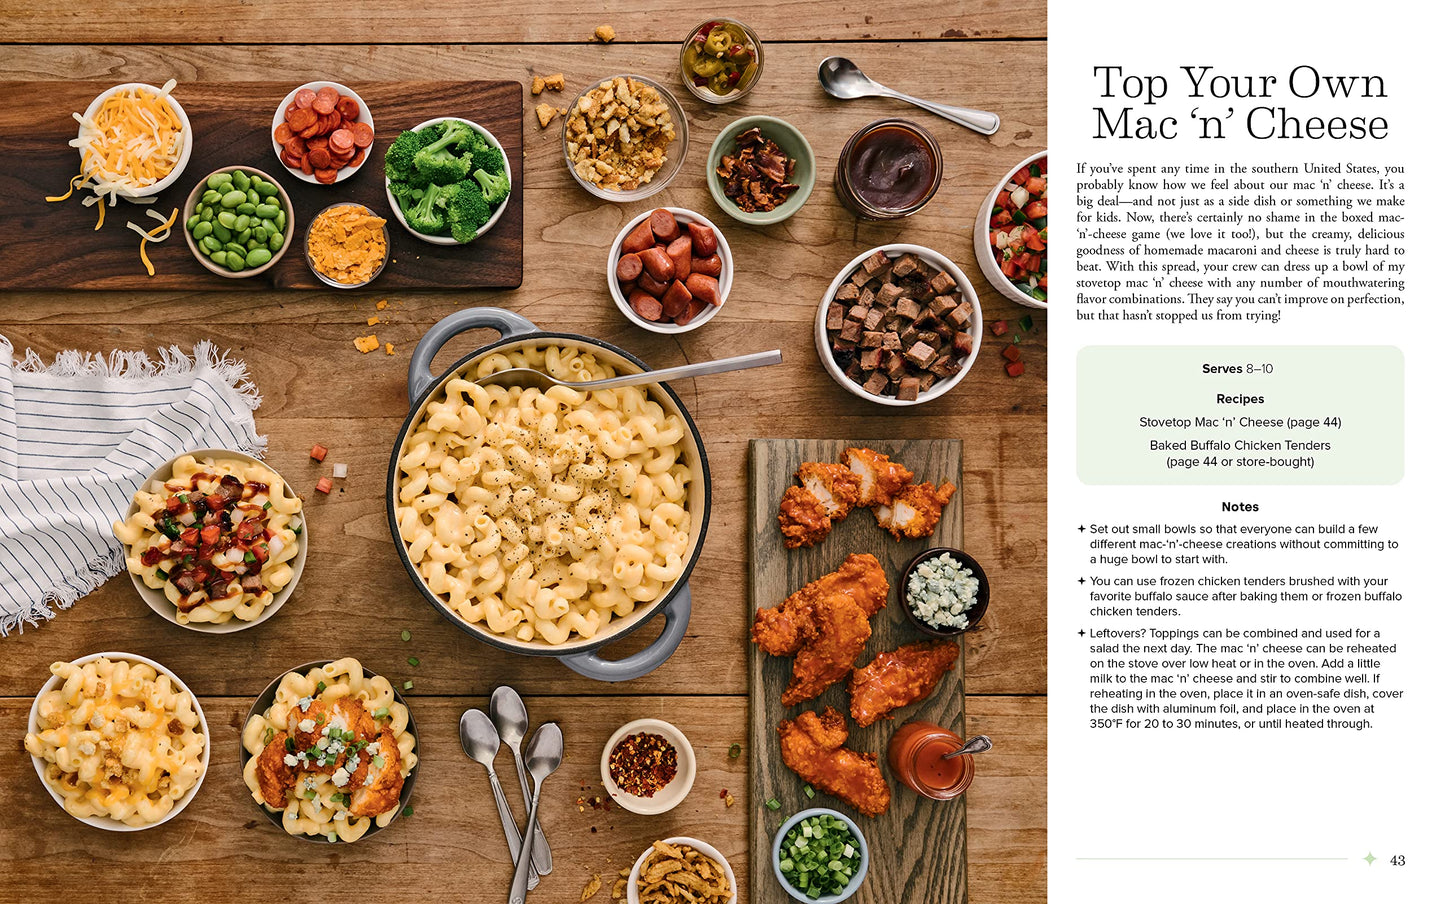 fifth set of pages has a picture of mac n cheese spread with toppings on a wooden table and text